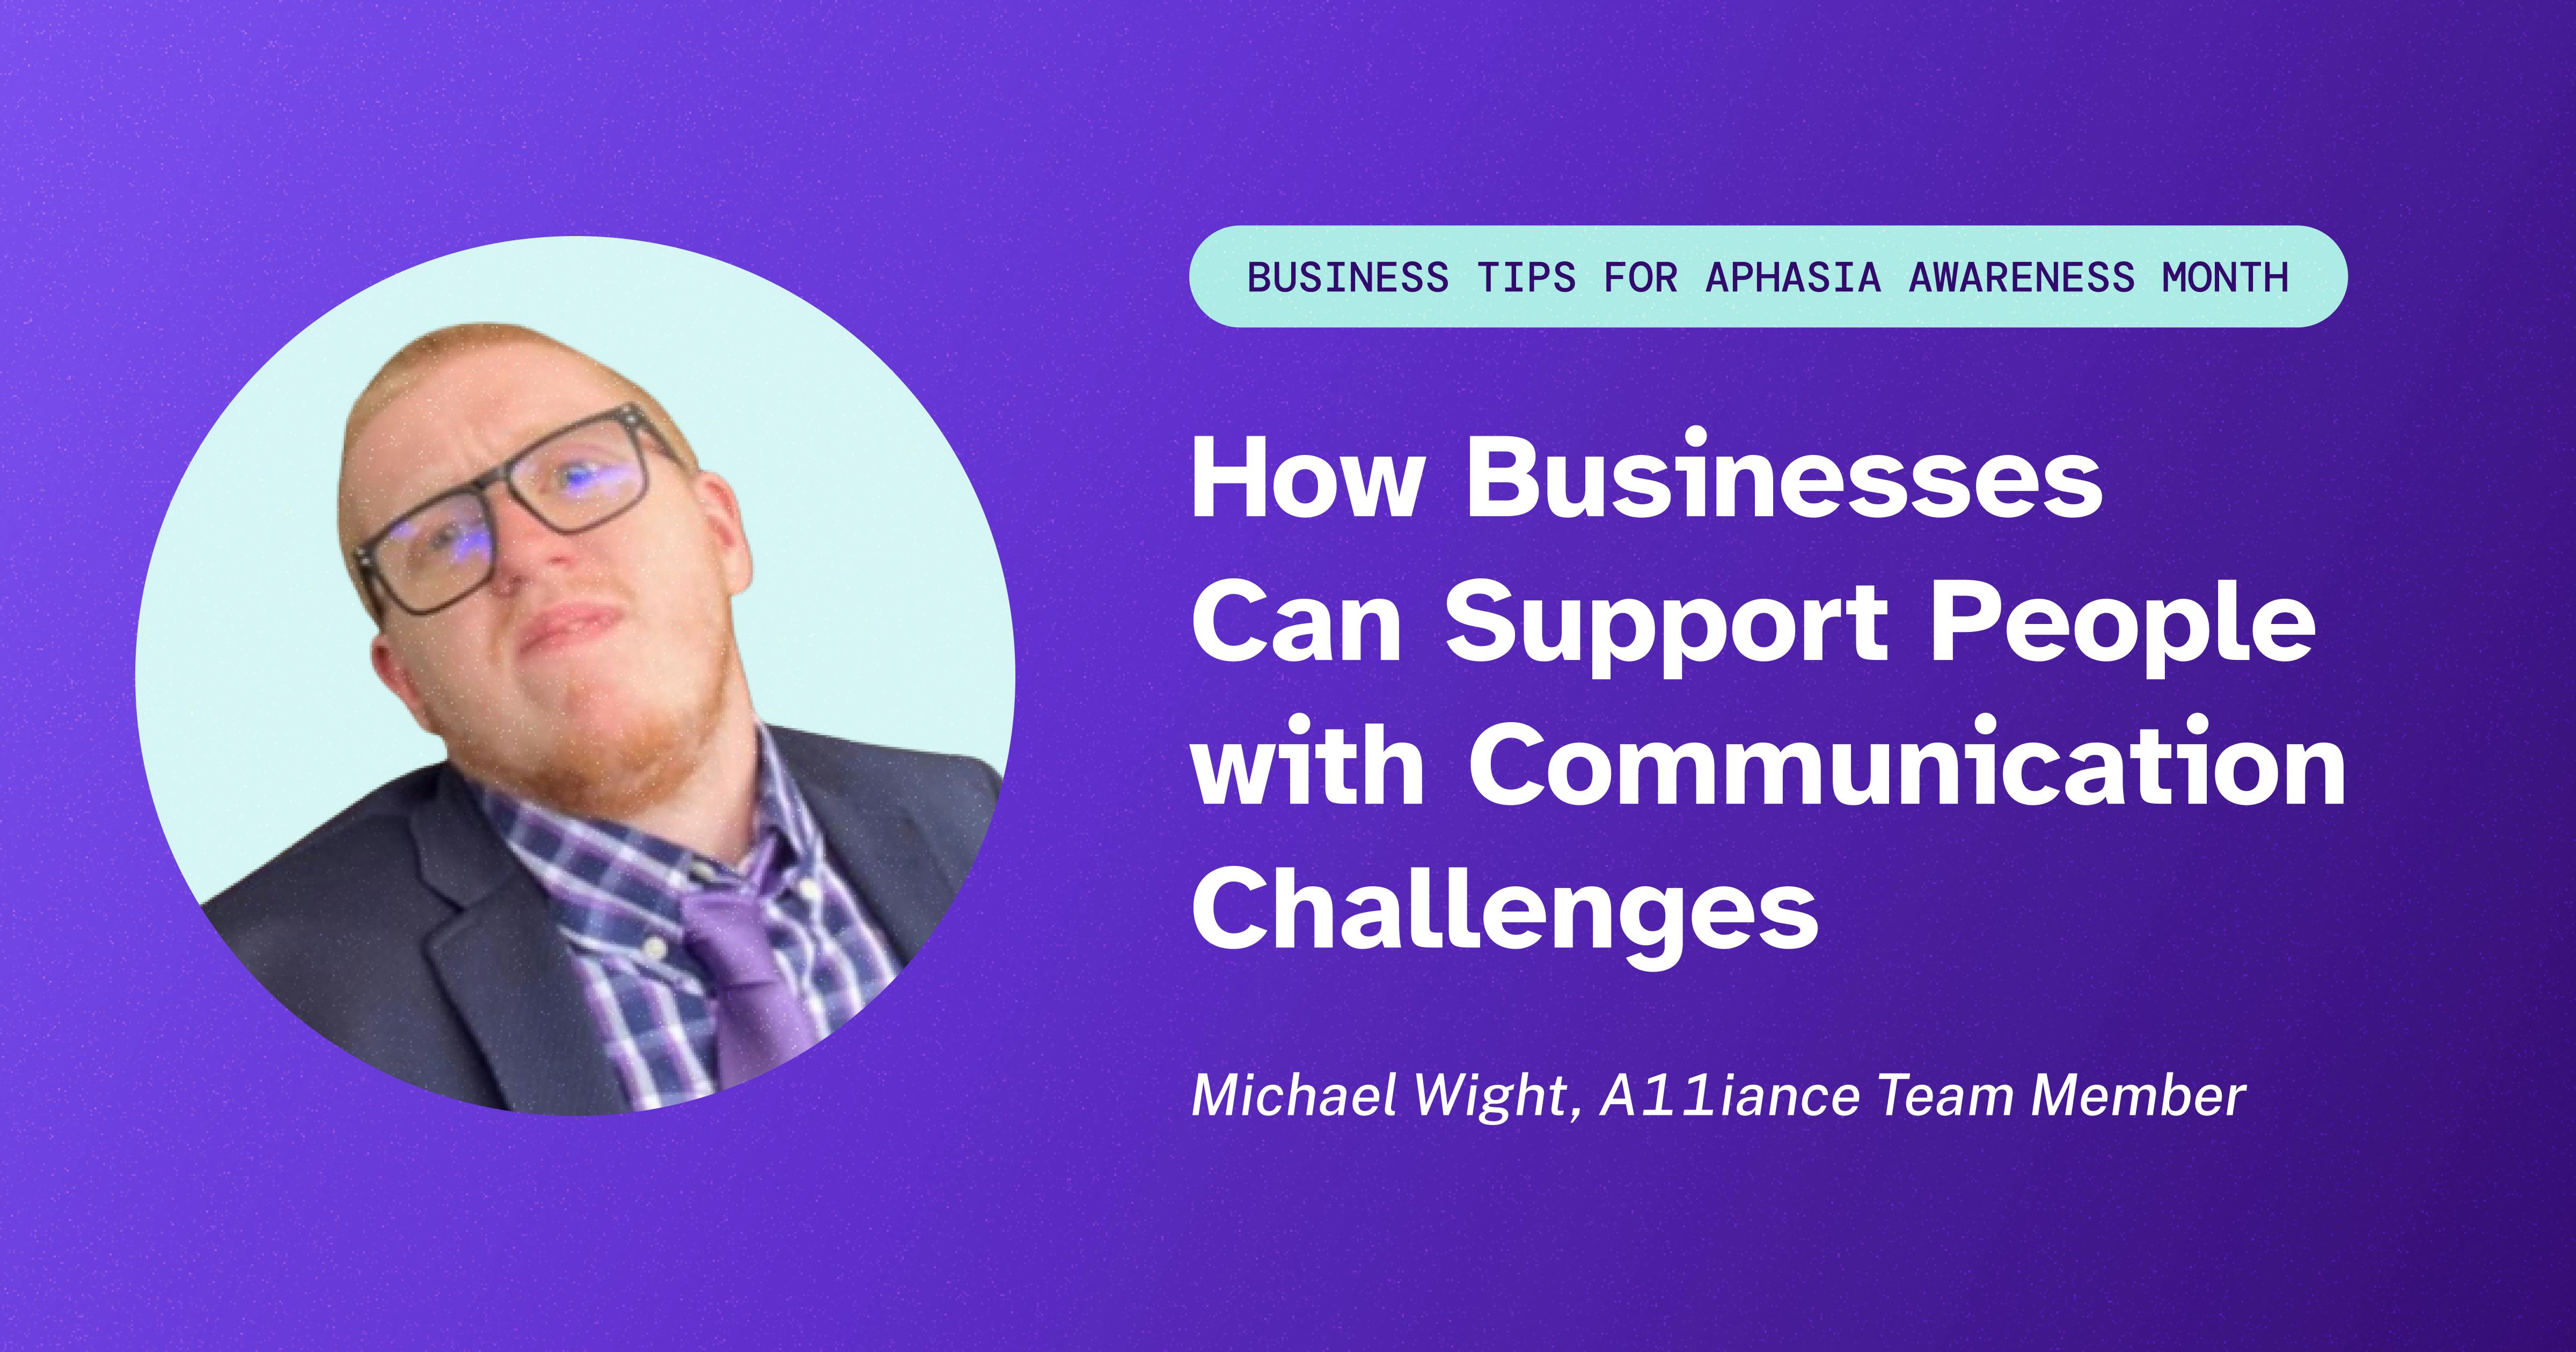 A banner that reads "Business Tips for Aphasia Awareness Month: How Businesses Can Support People with Communication Challenges" next to a headshot of Michael Wight wearing a dark suit and purple tie.